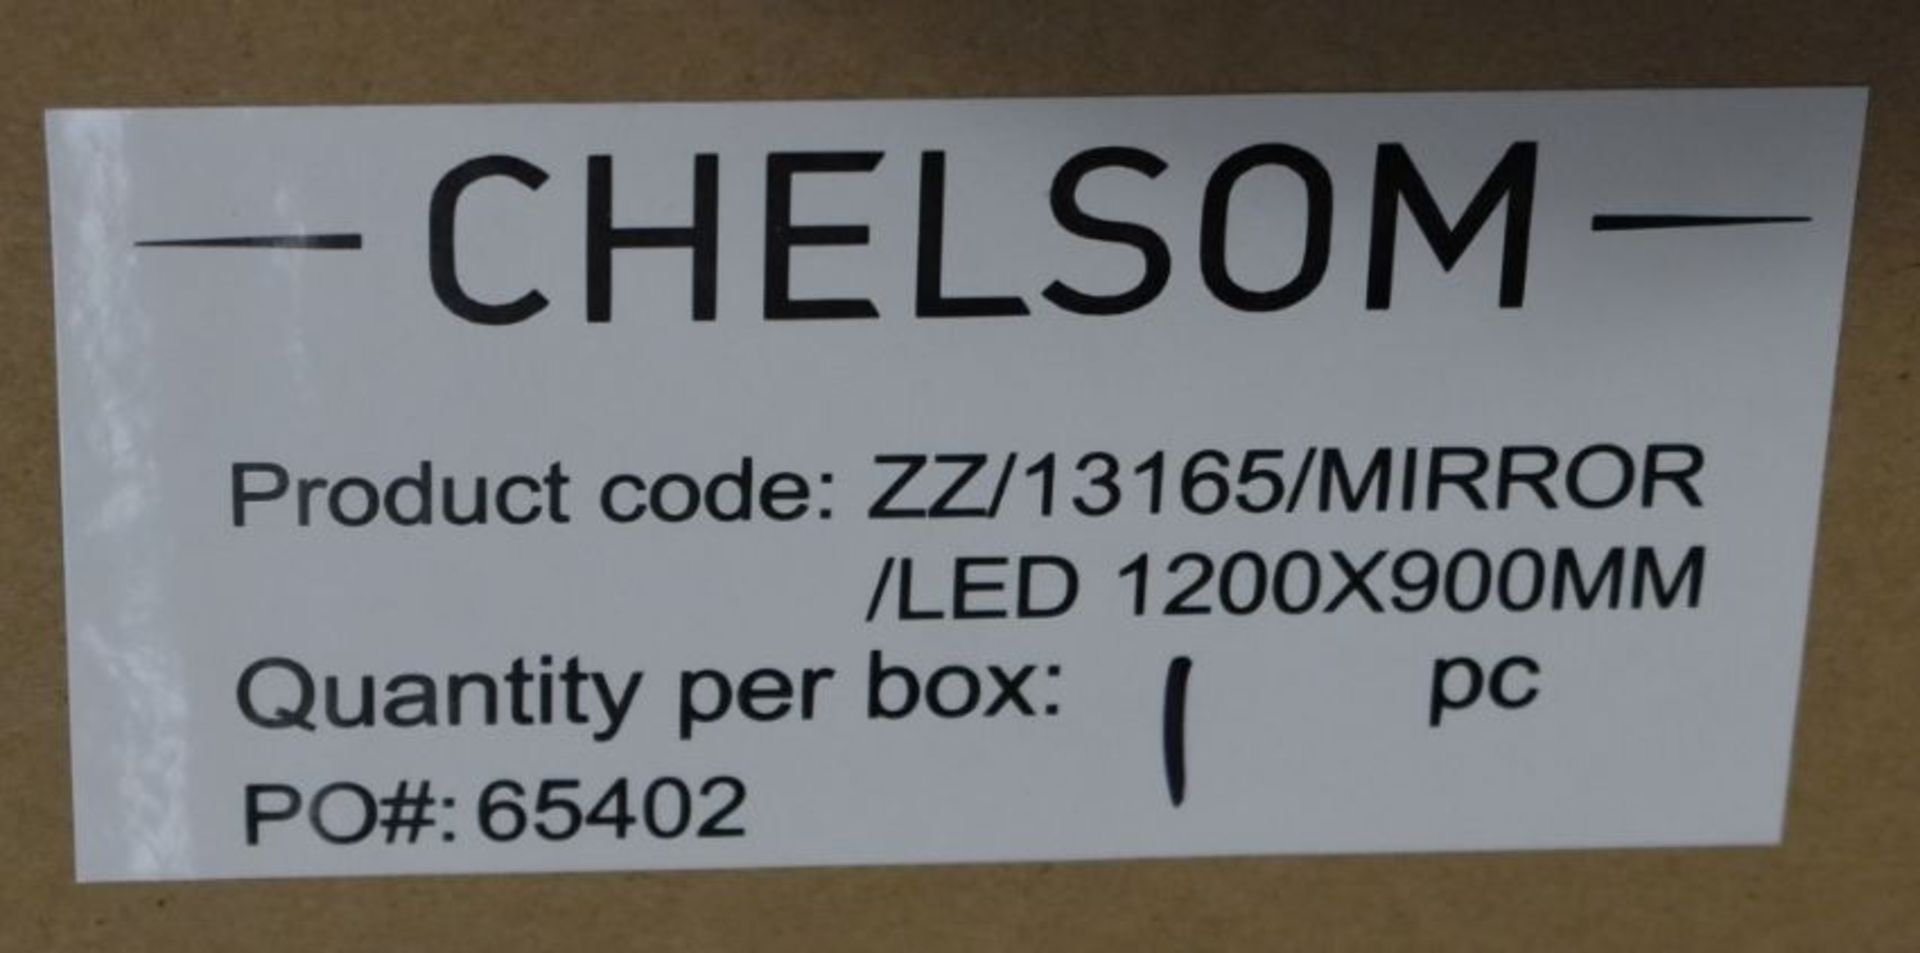 1 x Chelsom Large Illuminated LED Bathroom Mirror With Demister - Brand New Stock - As Used in Major - Image 13 of 13